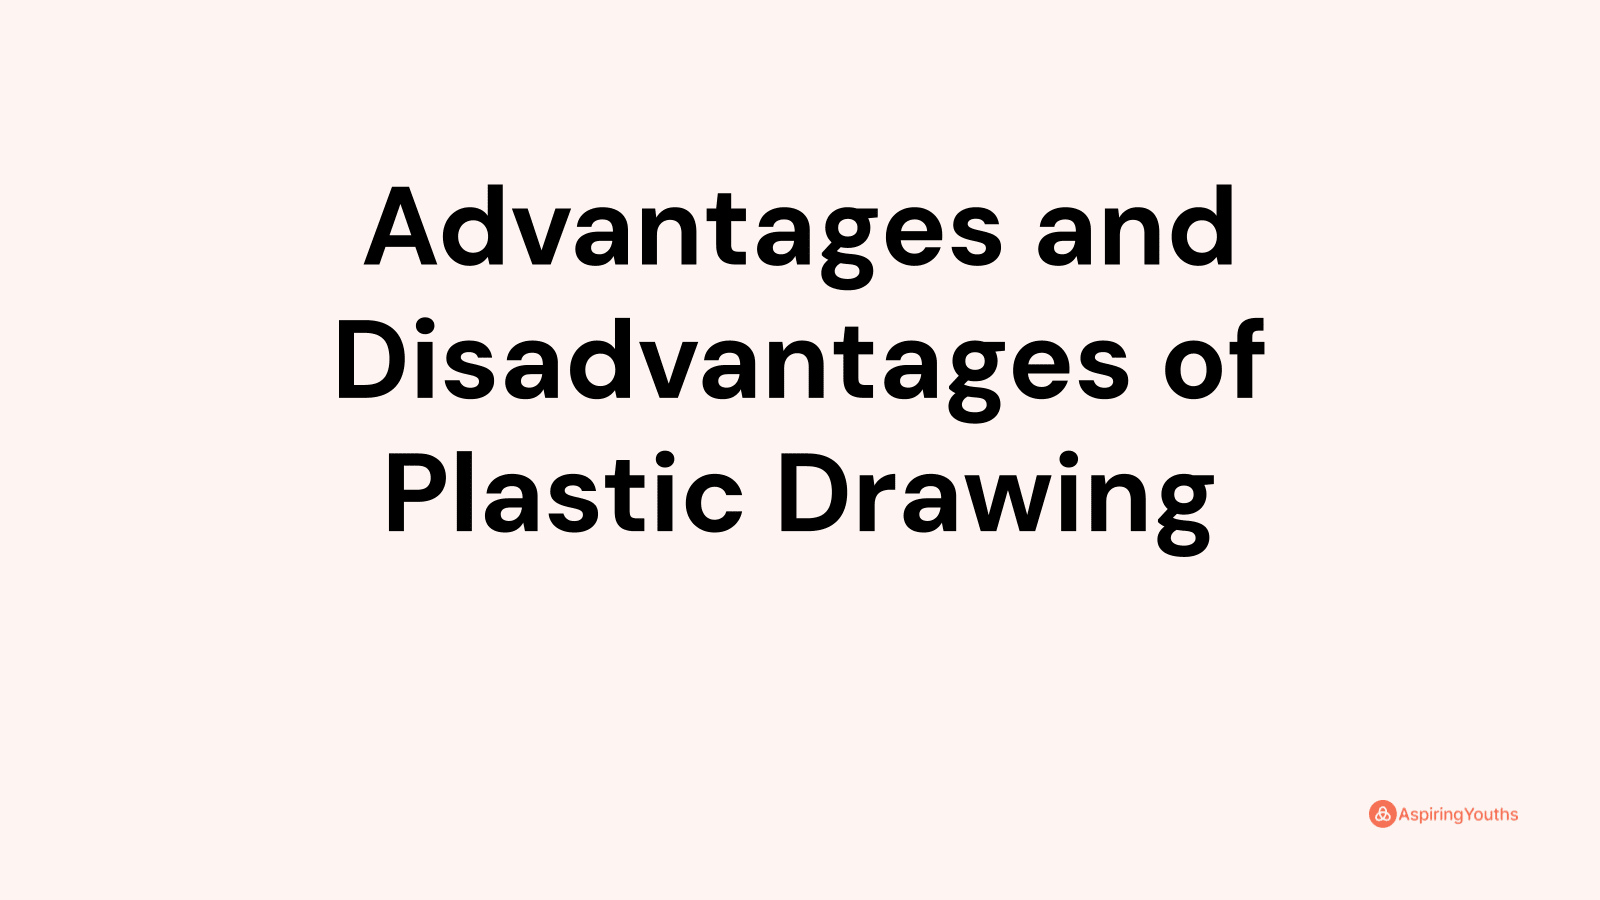 Advantages and disadvantages of Plastic Drawing